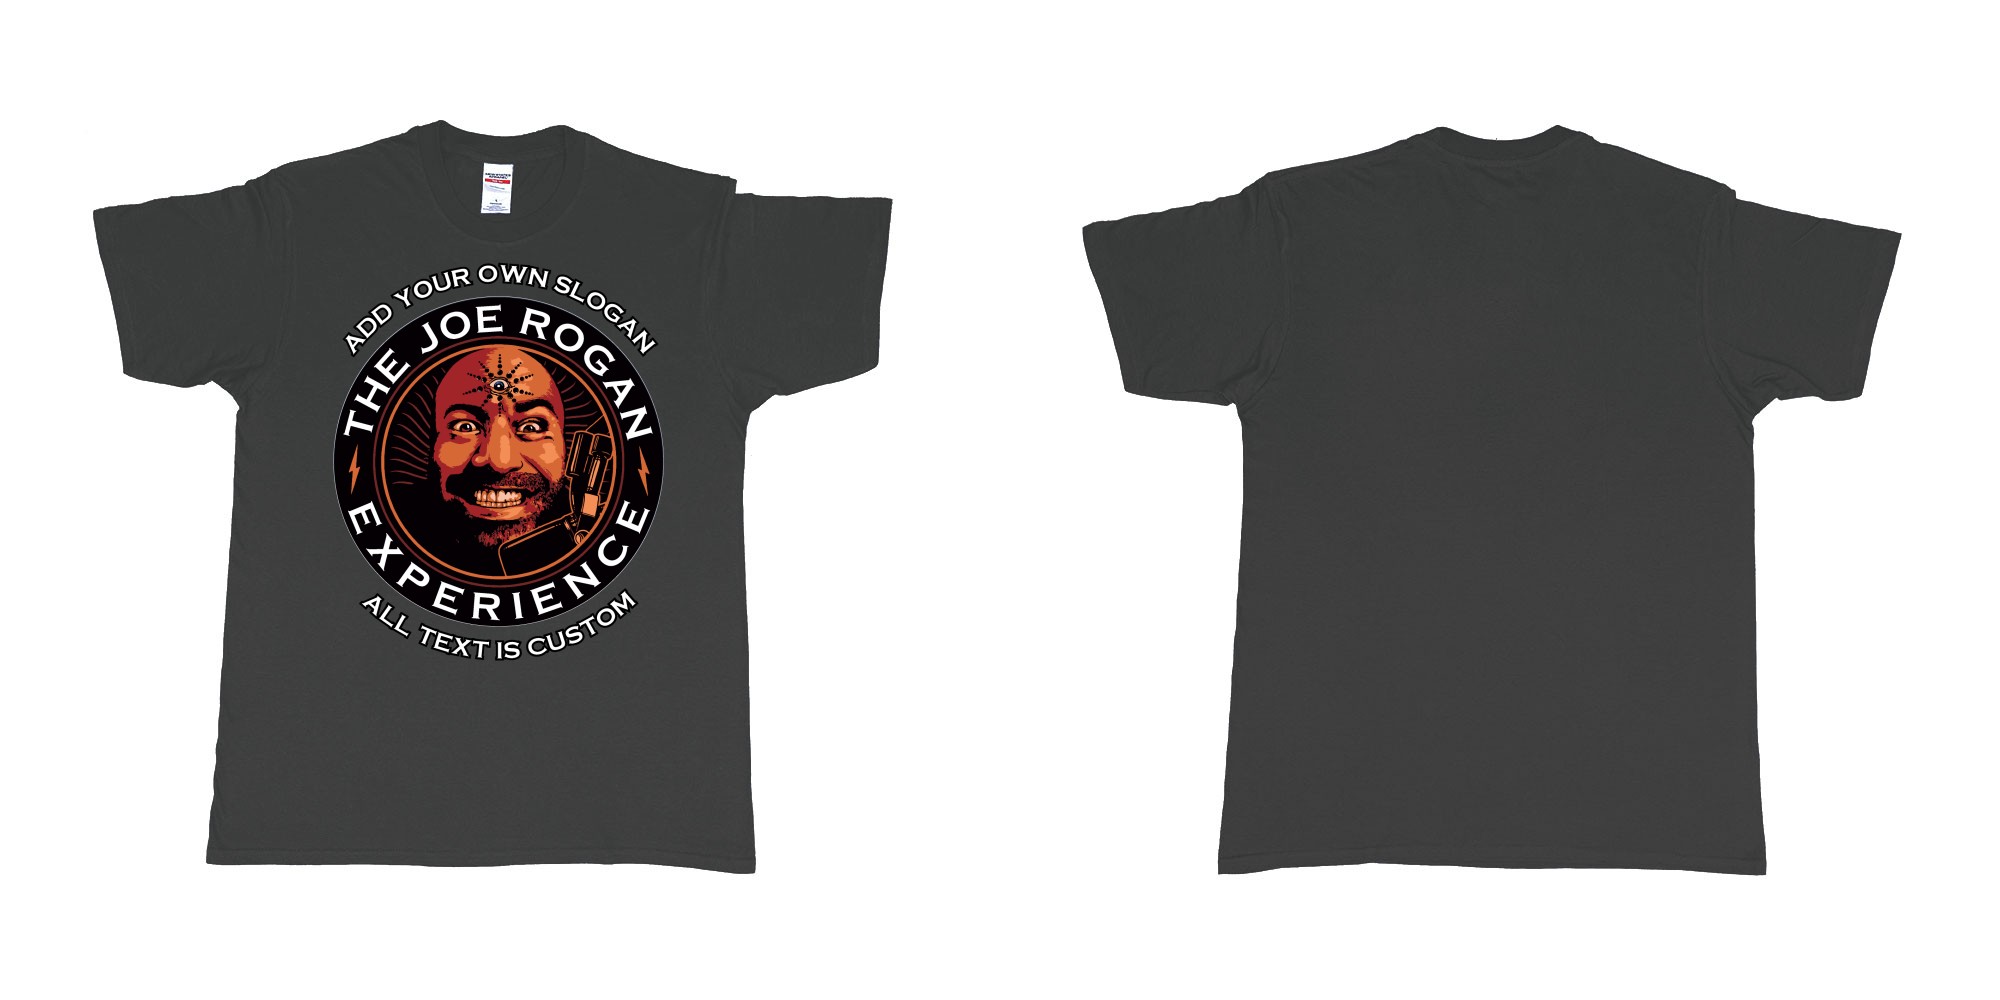 Custom tshirt design the joe rogan experience custom tshirt in fabric color black choice your own text made in Bali by The Pirate Way